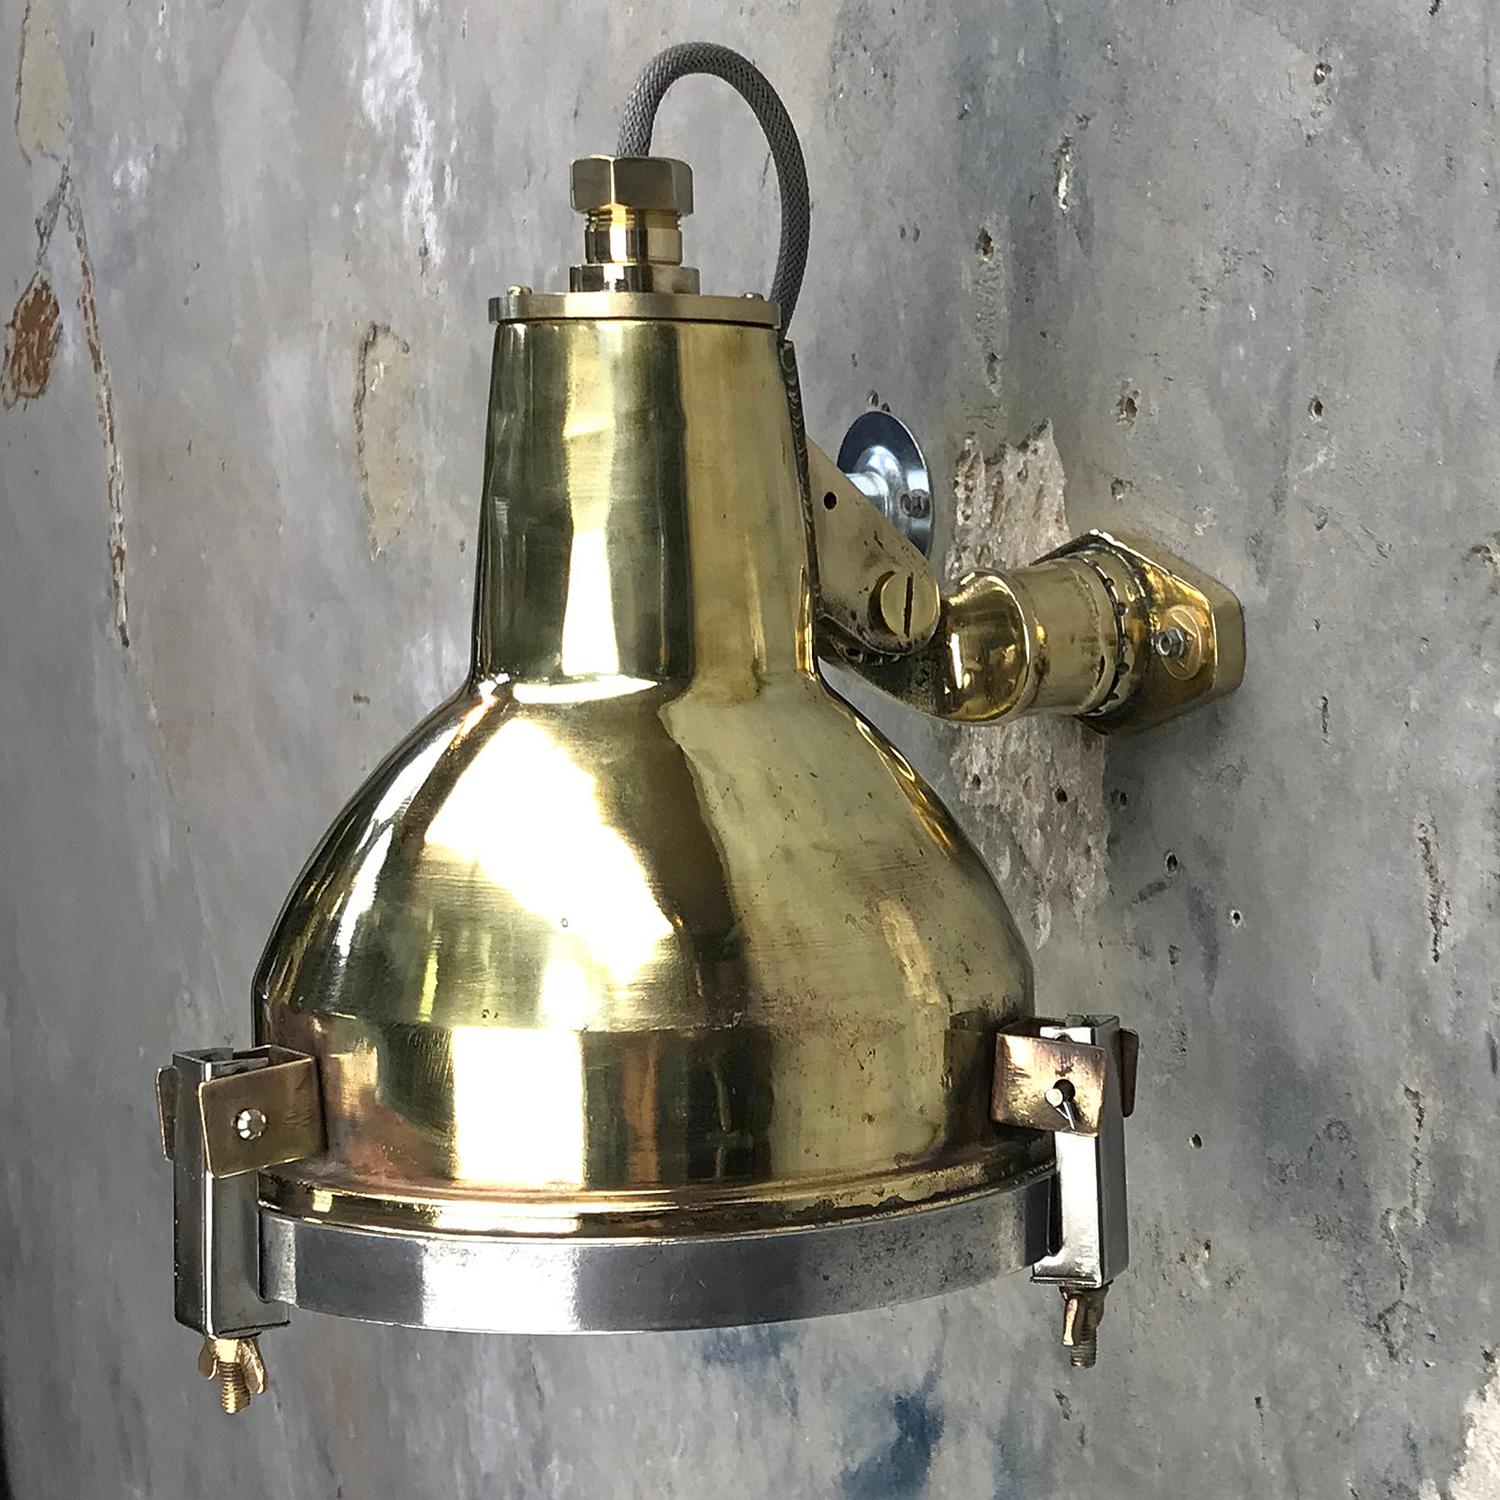 Late 20th Century Late Century Cast Brass, Aluminum and Glass Industrial Uplighter or Wall Washer